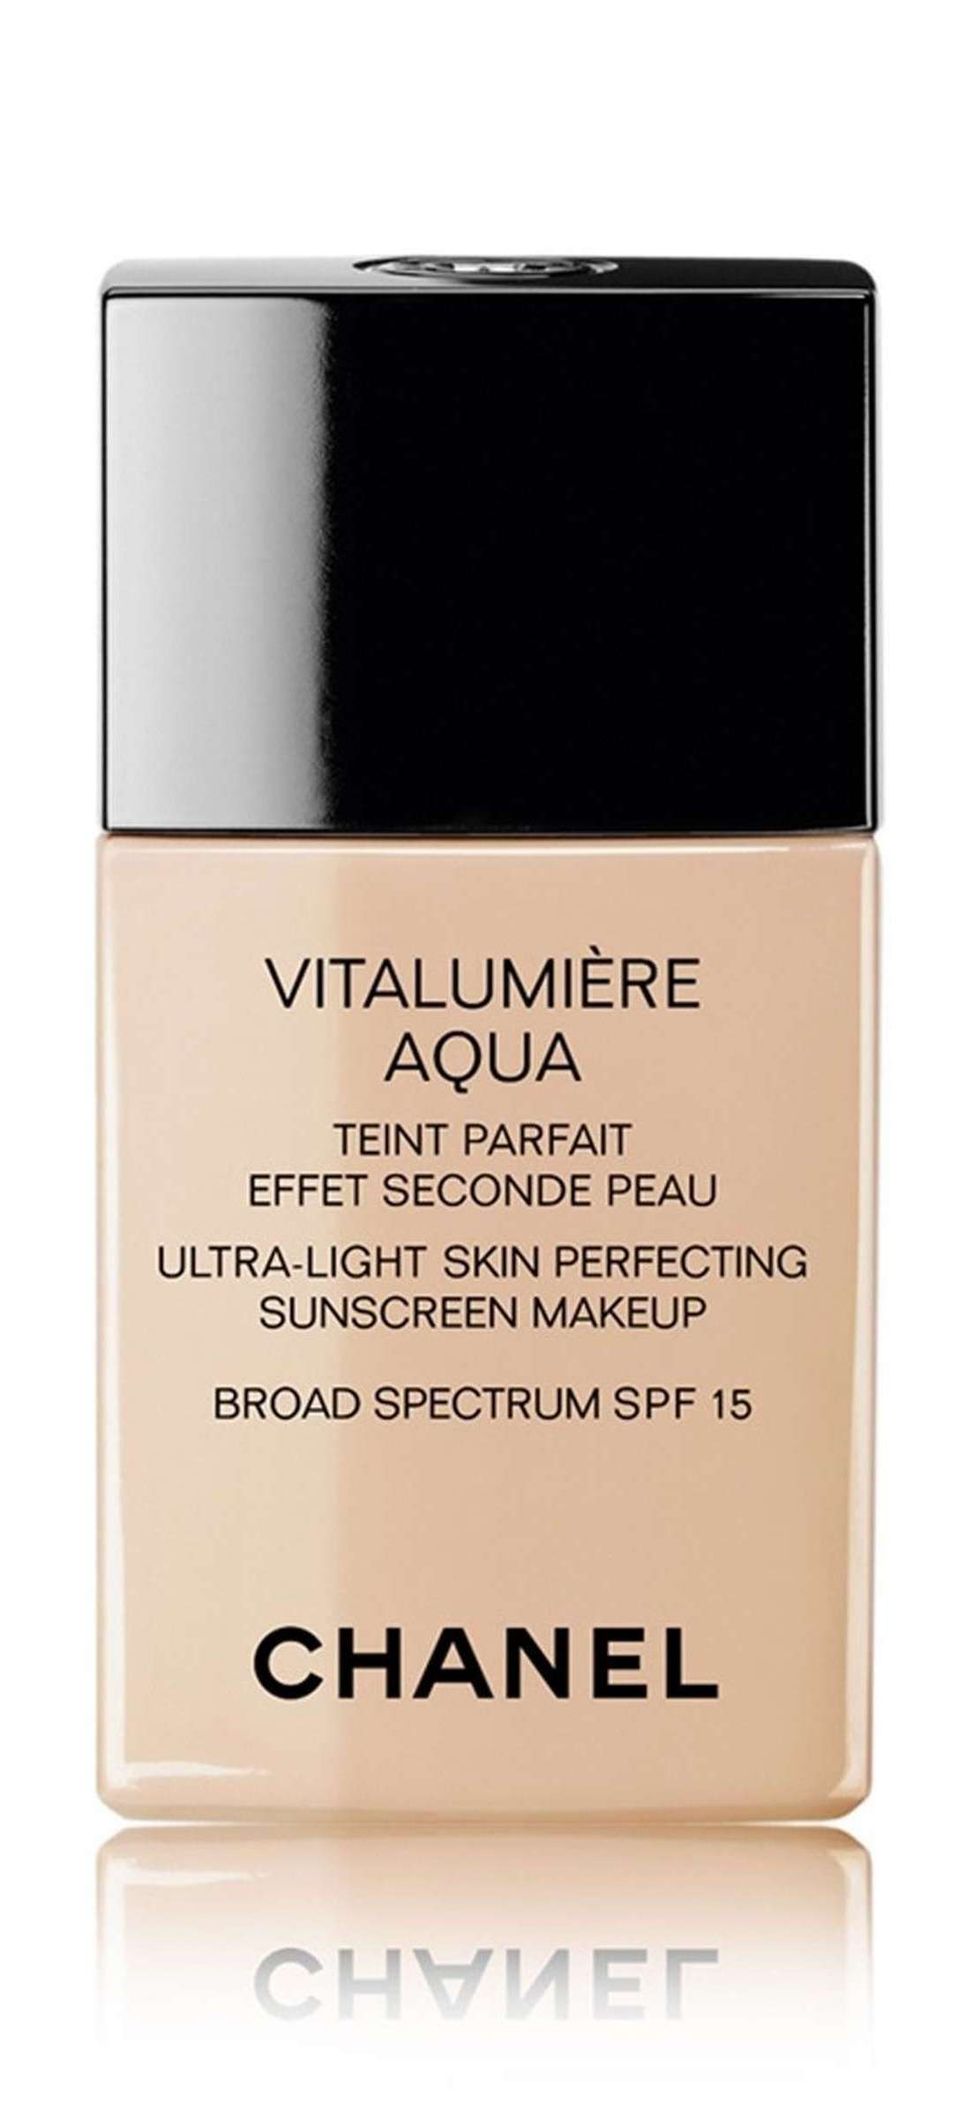 Best Foundation for Oily Skin - 21 Oil Free Foundation Makeup Picks for  Acne-Prone Skin